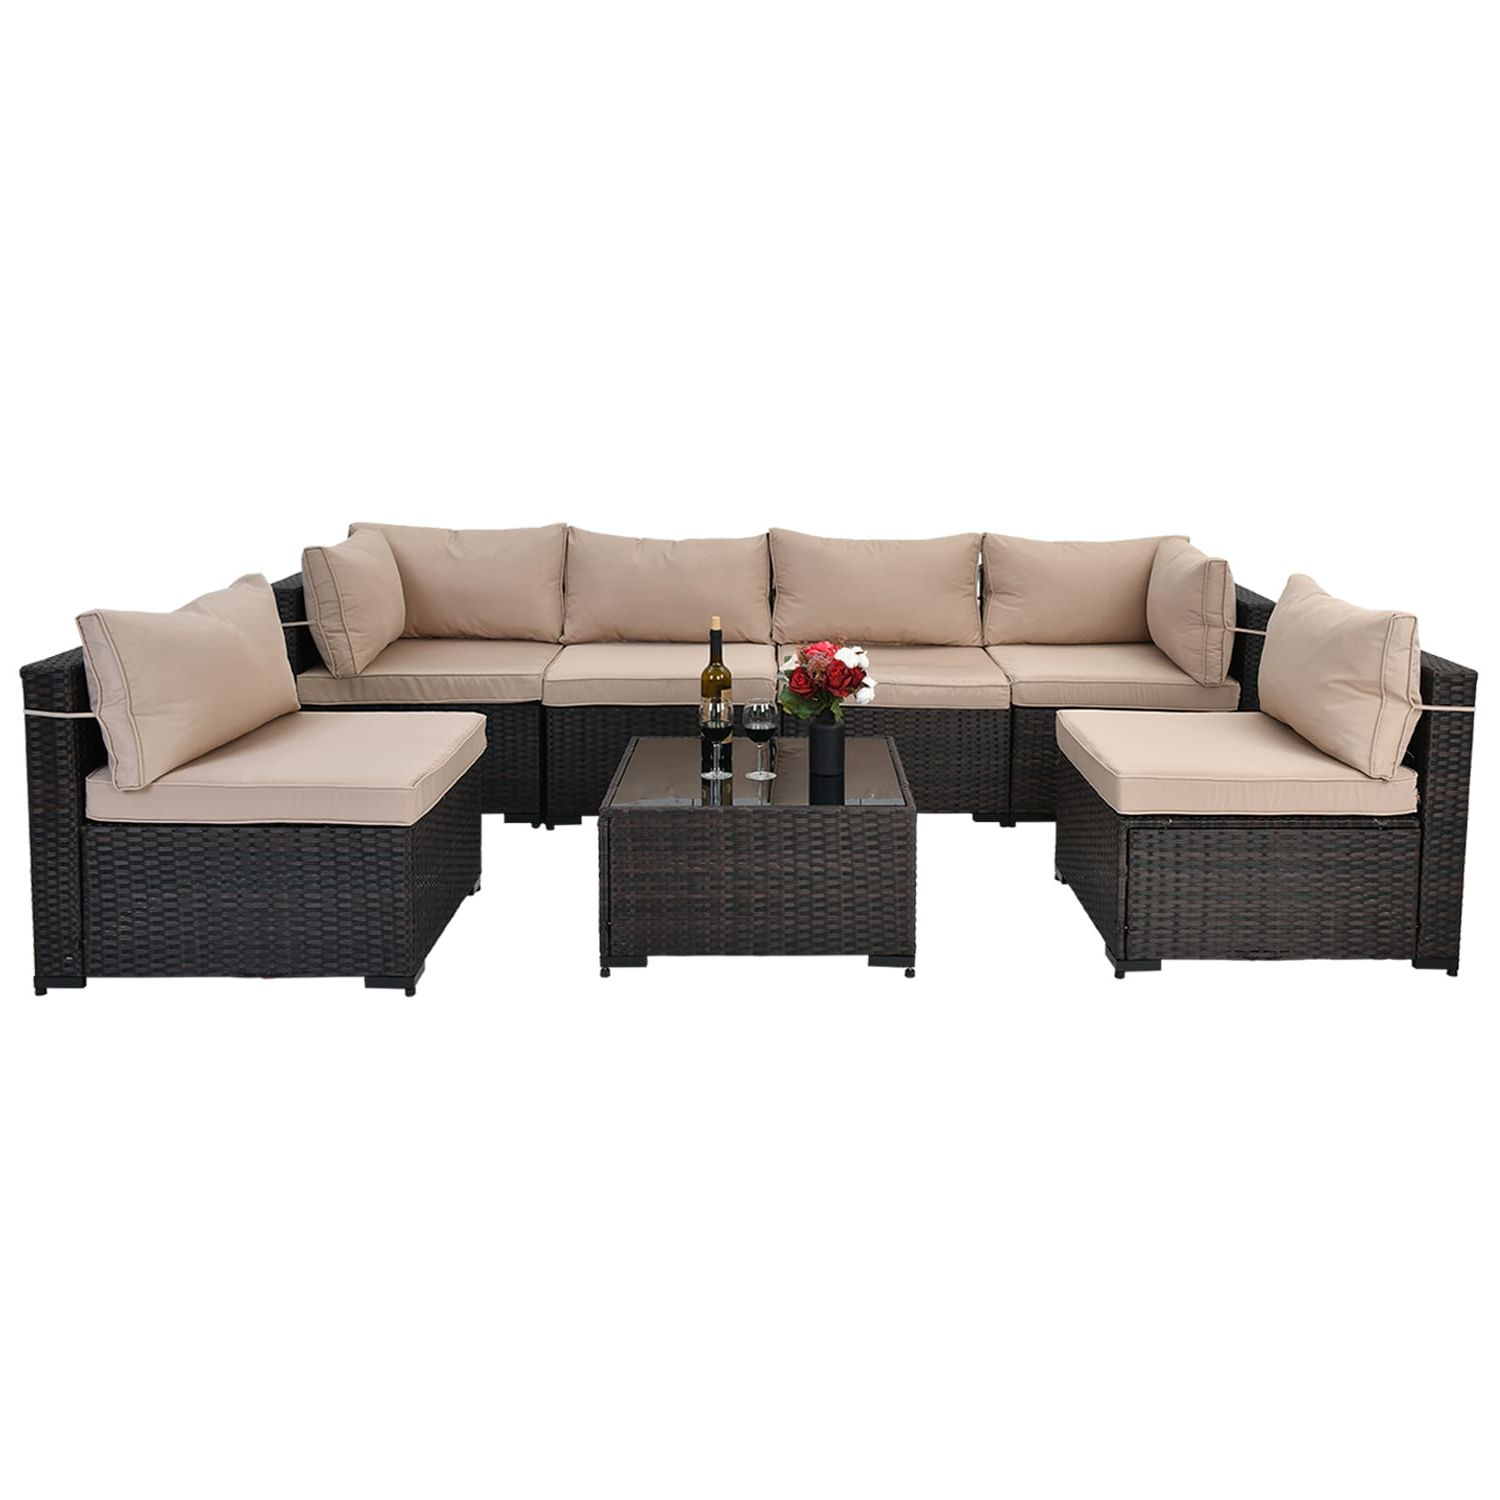 Popular Patio Conversation Set 7 Piece Rattan Patio Conversation Set With Off White  Cushions In The Patio Conversation Sets Department At Lowes In 7 Piece Rattan Sectional Sofa Set (View 12 of 15)